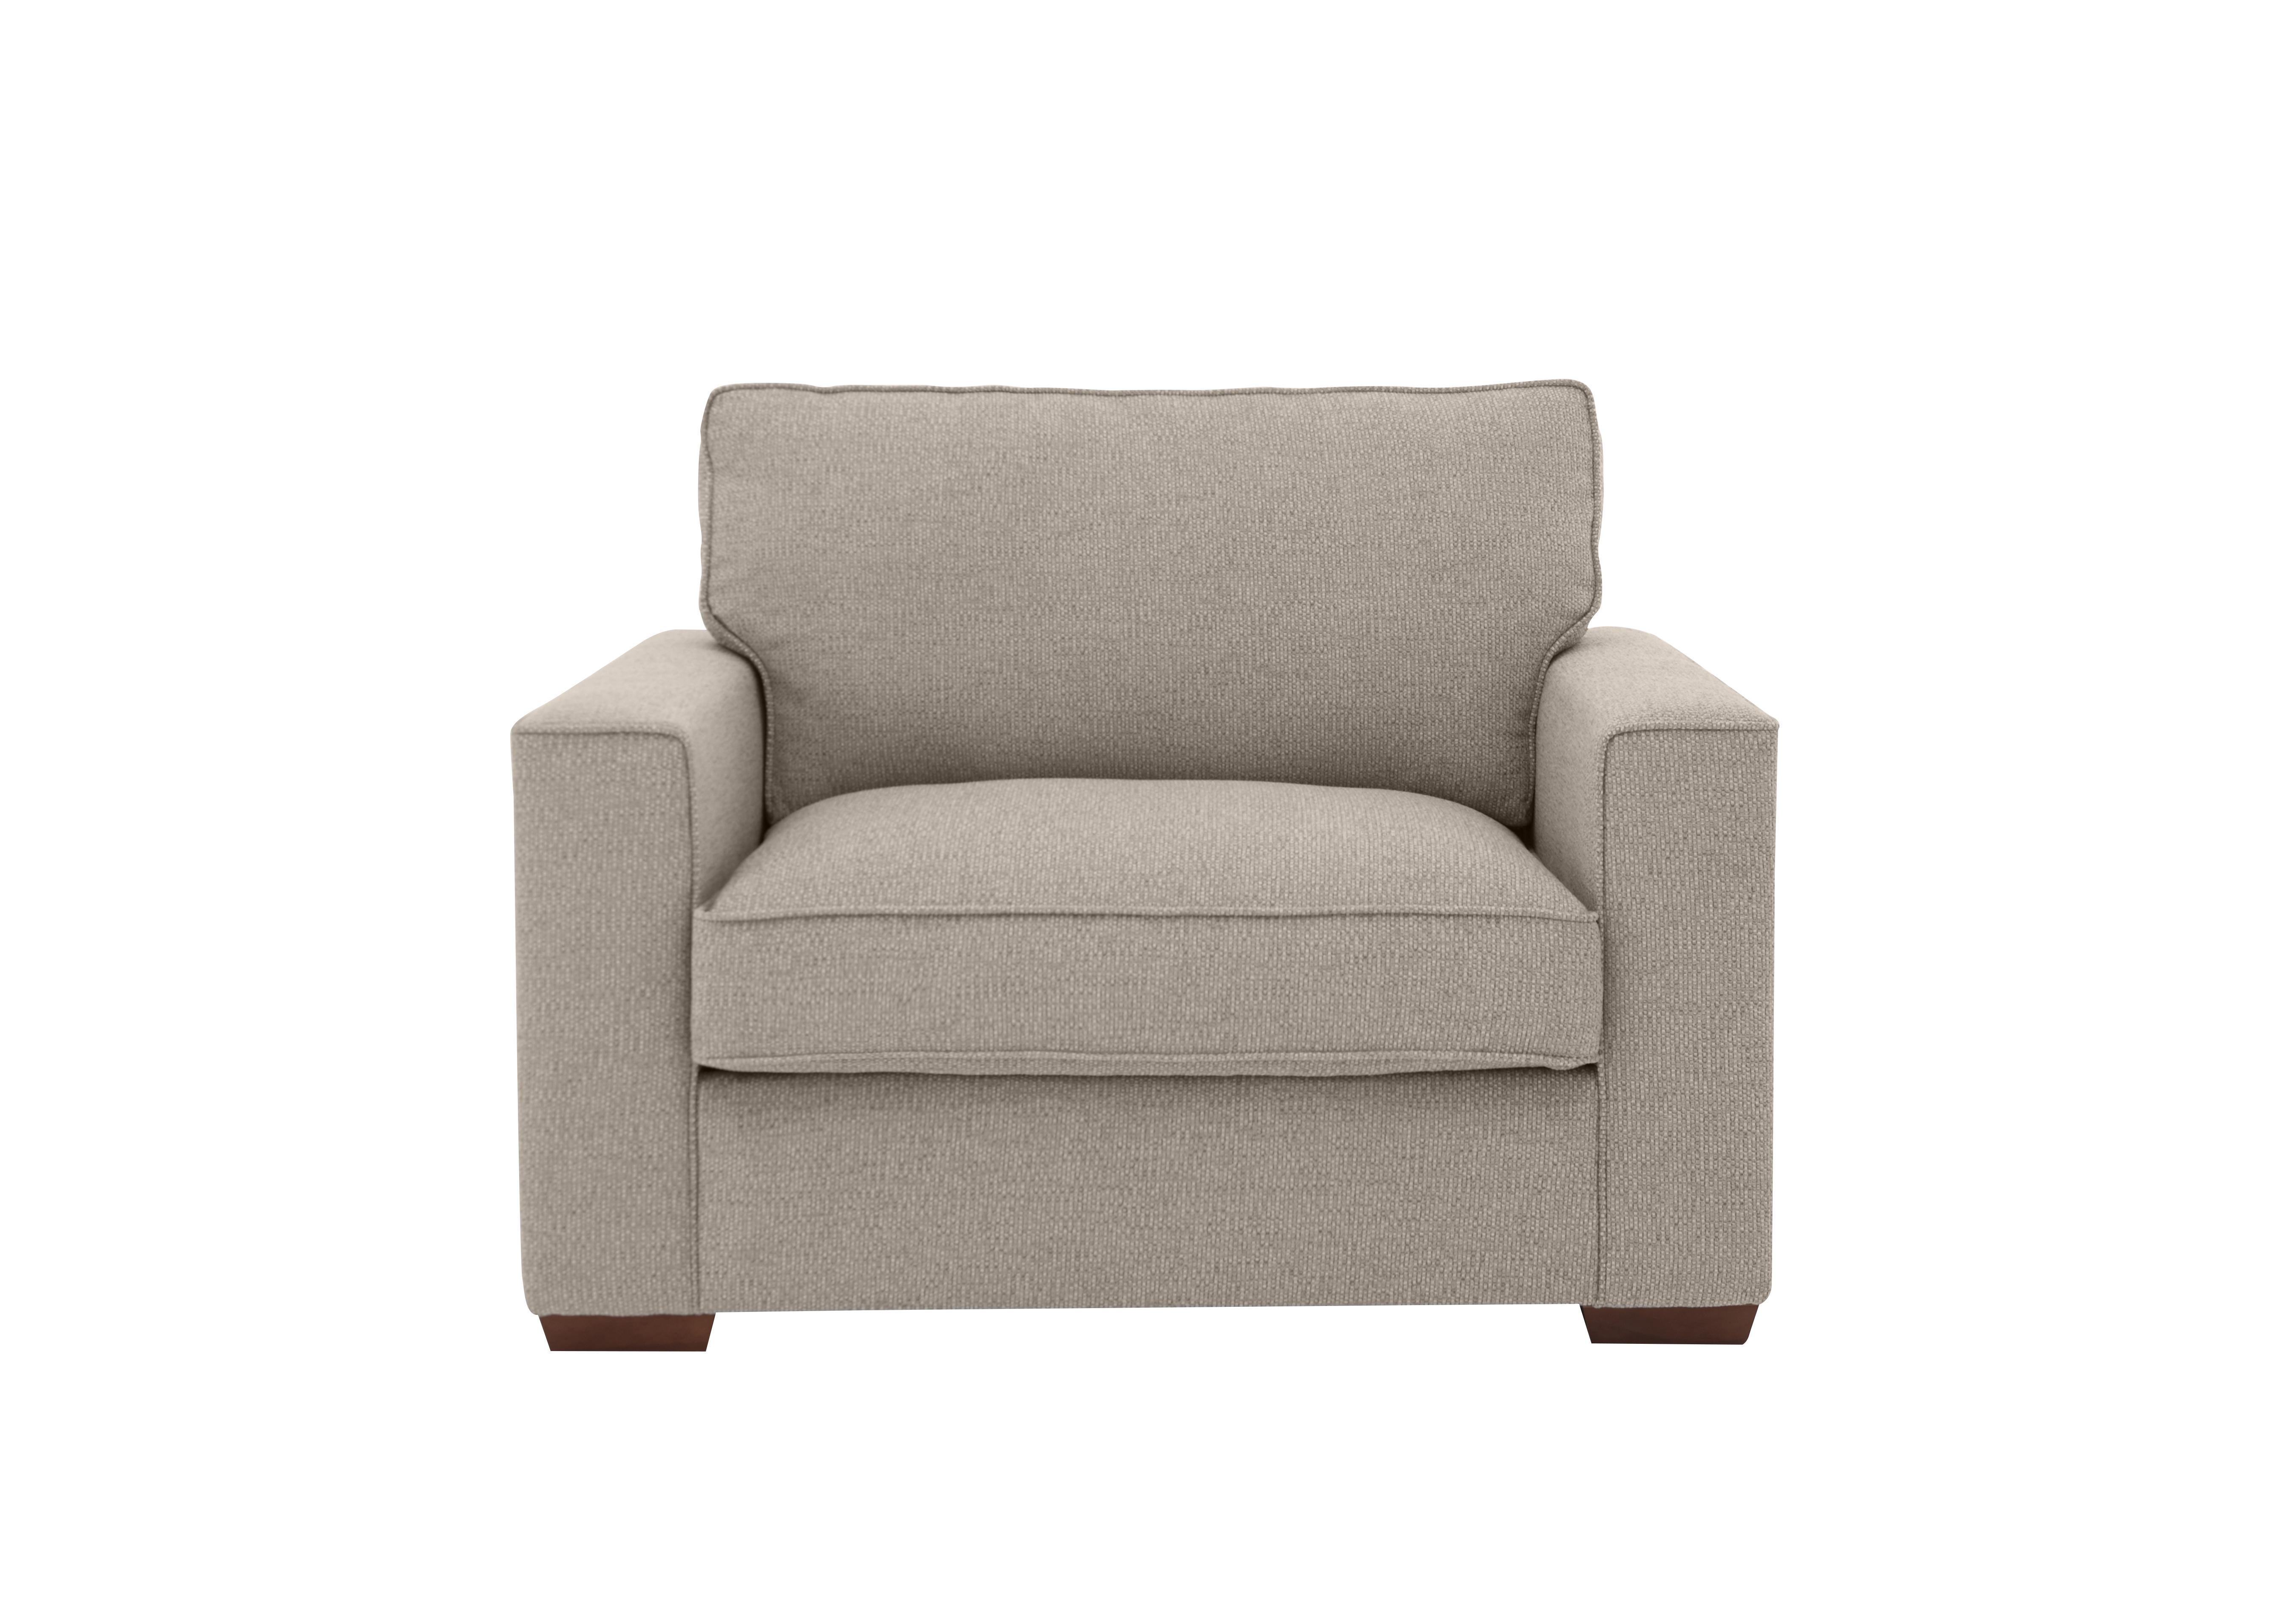 Cory Fabric Snuggle Chair in Dallas Natural on Furniture Village